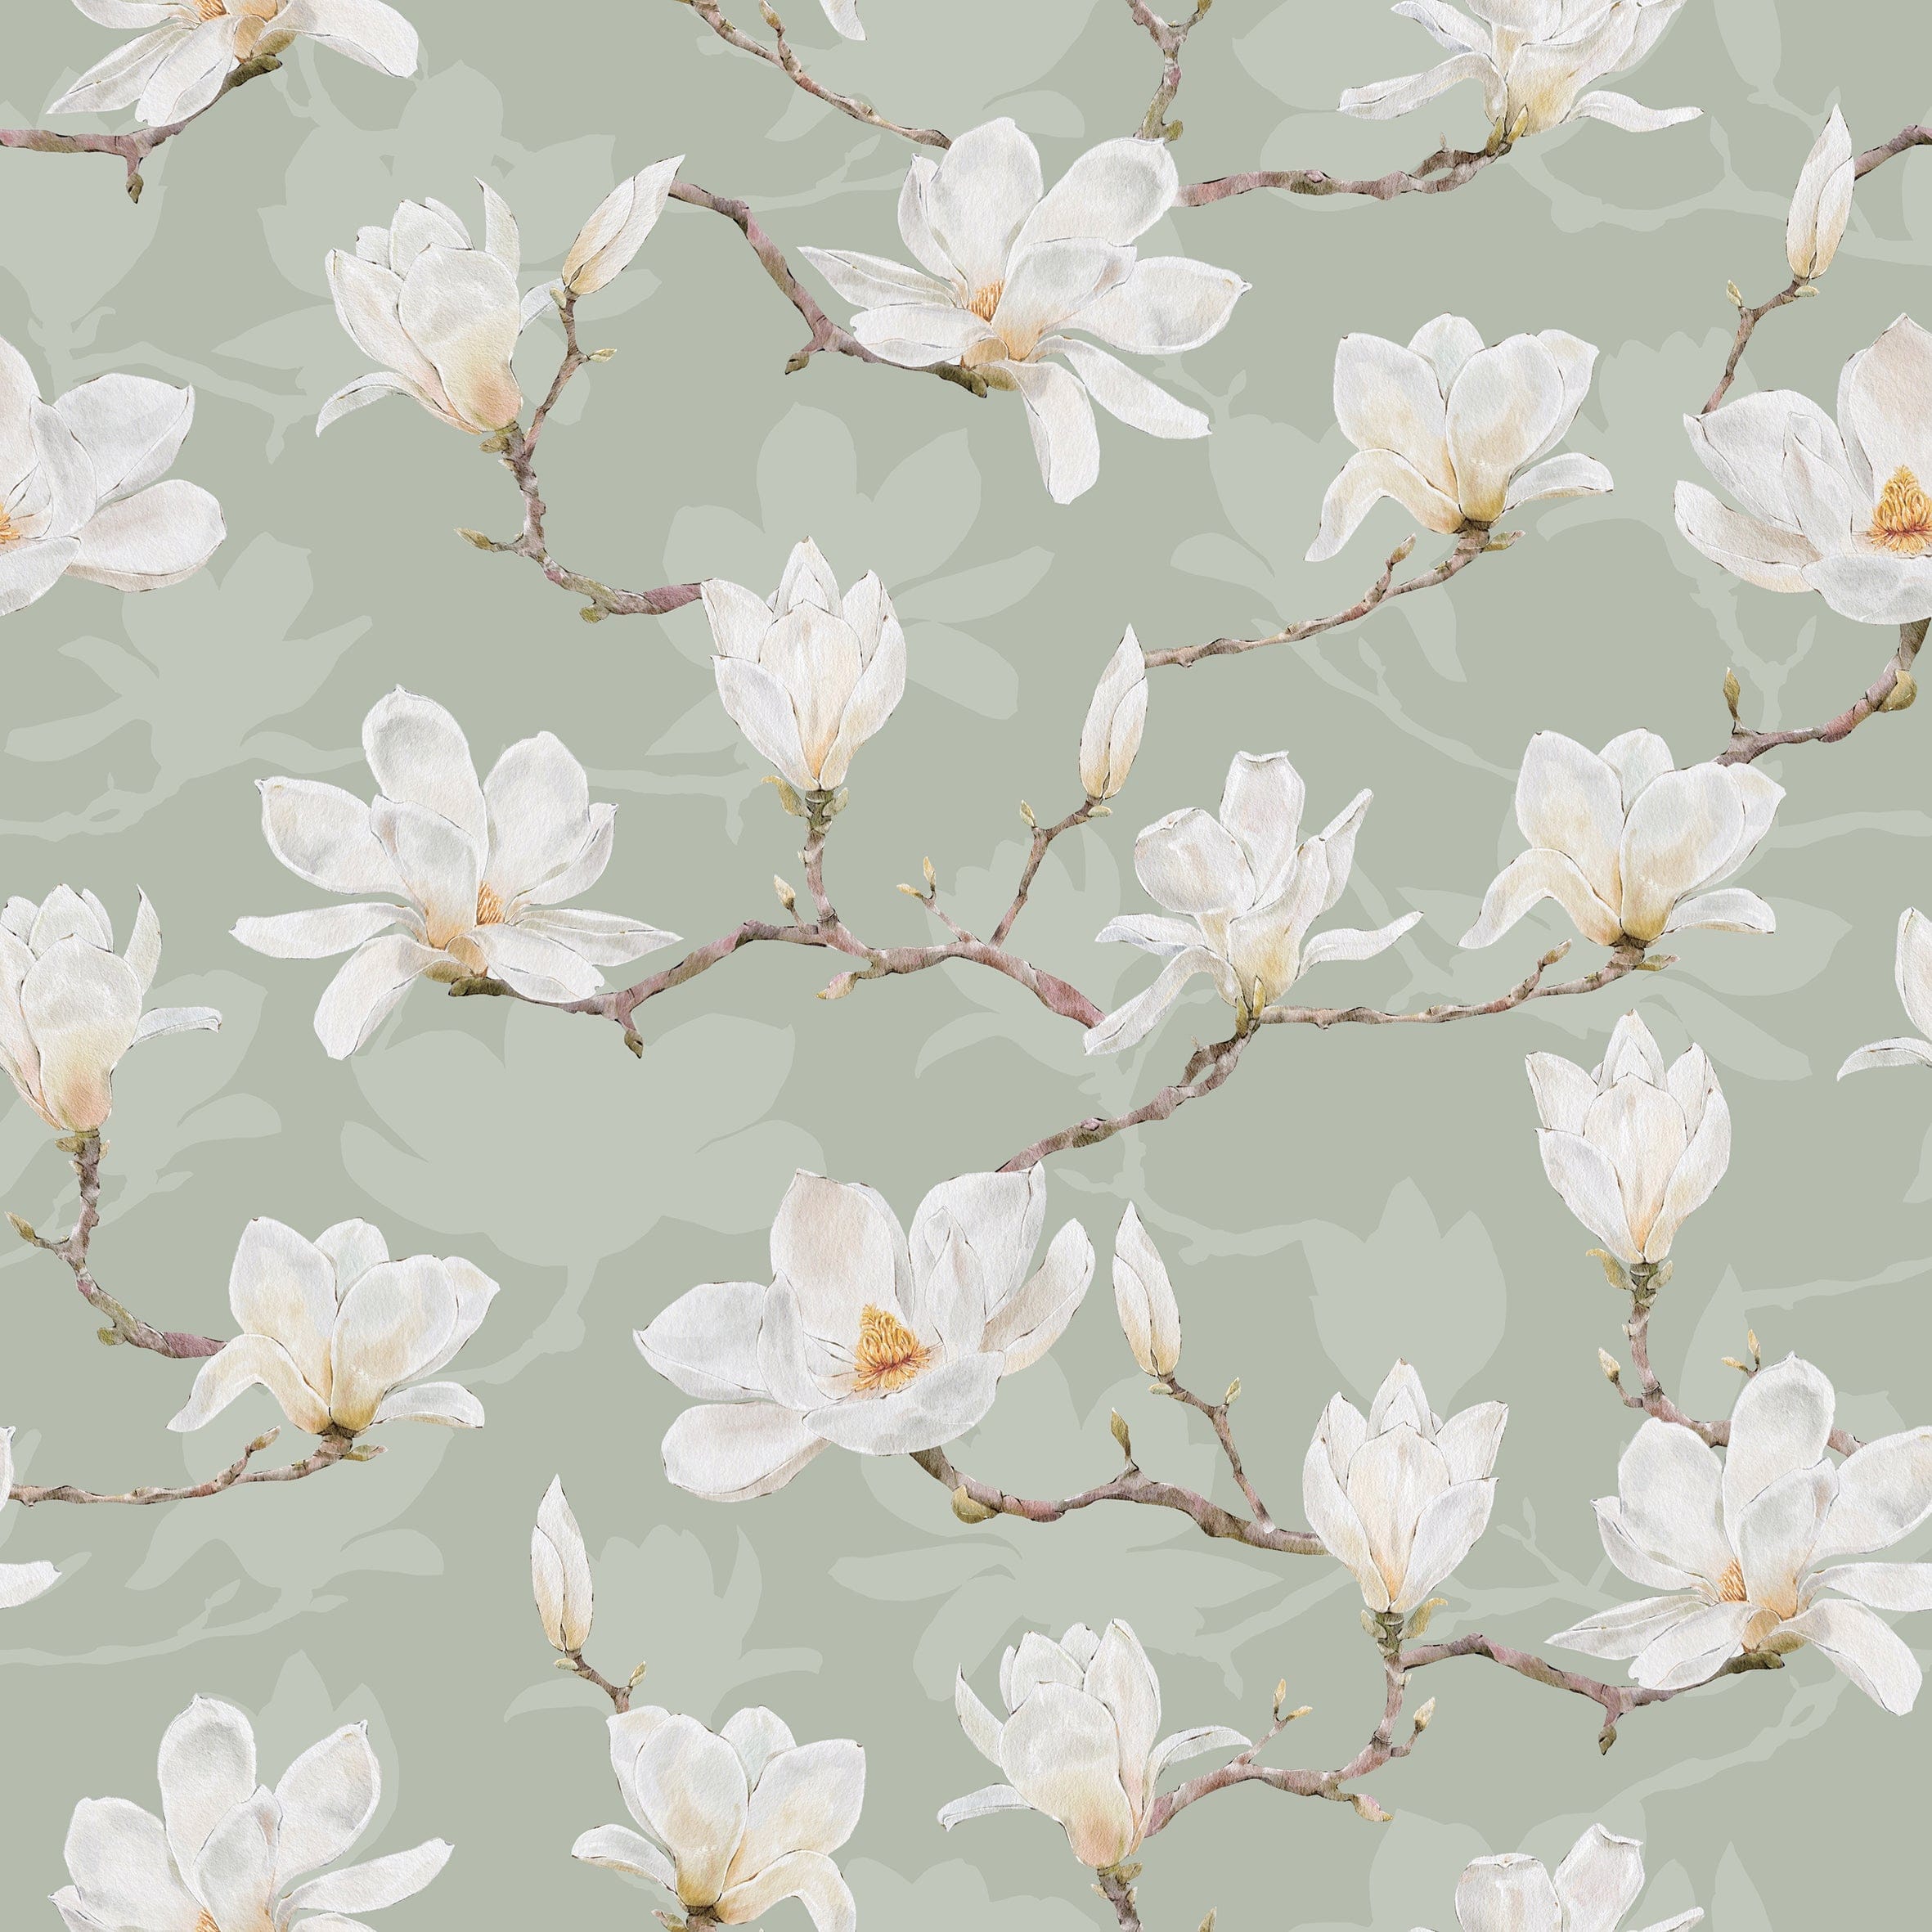 A close-up of the Watercolour Magnolia Wallpaper, highlighting the detailed brush strokes and soft color palette of the white magnolias set against a muted green backdrop, perfect for adding a touch of botanical beauty and tranquility to any room.